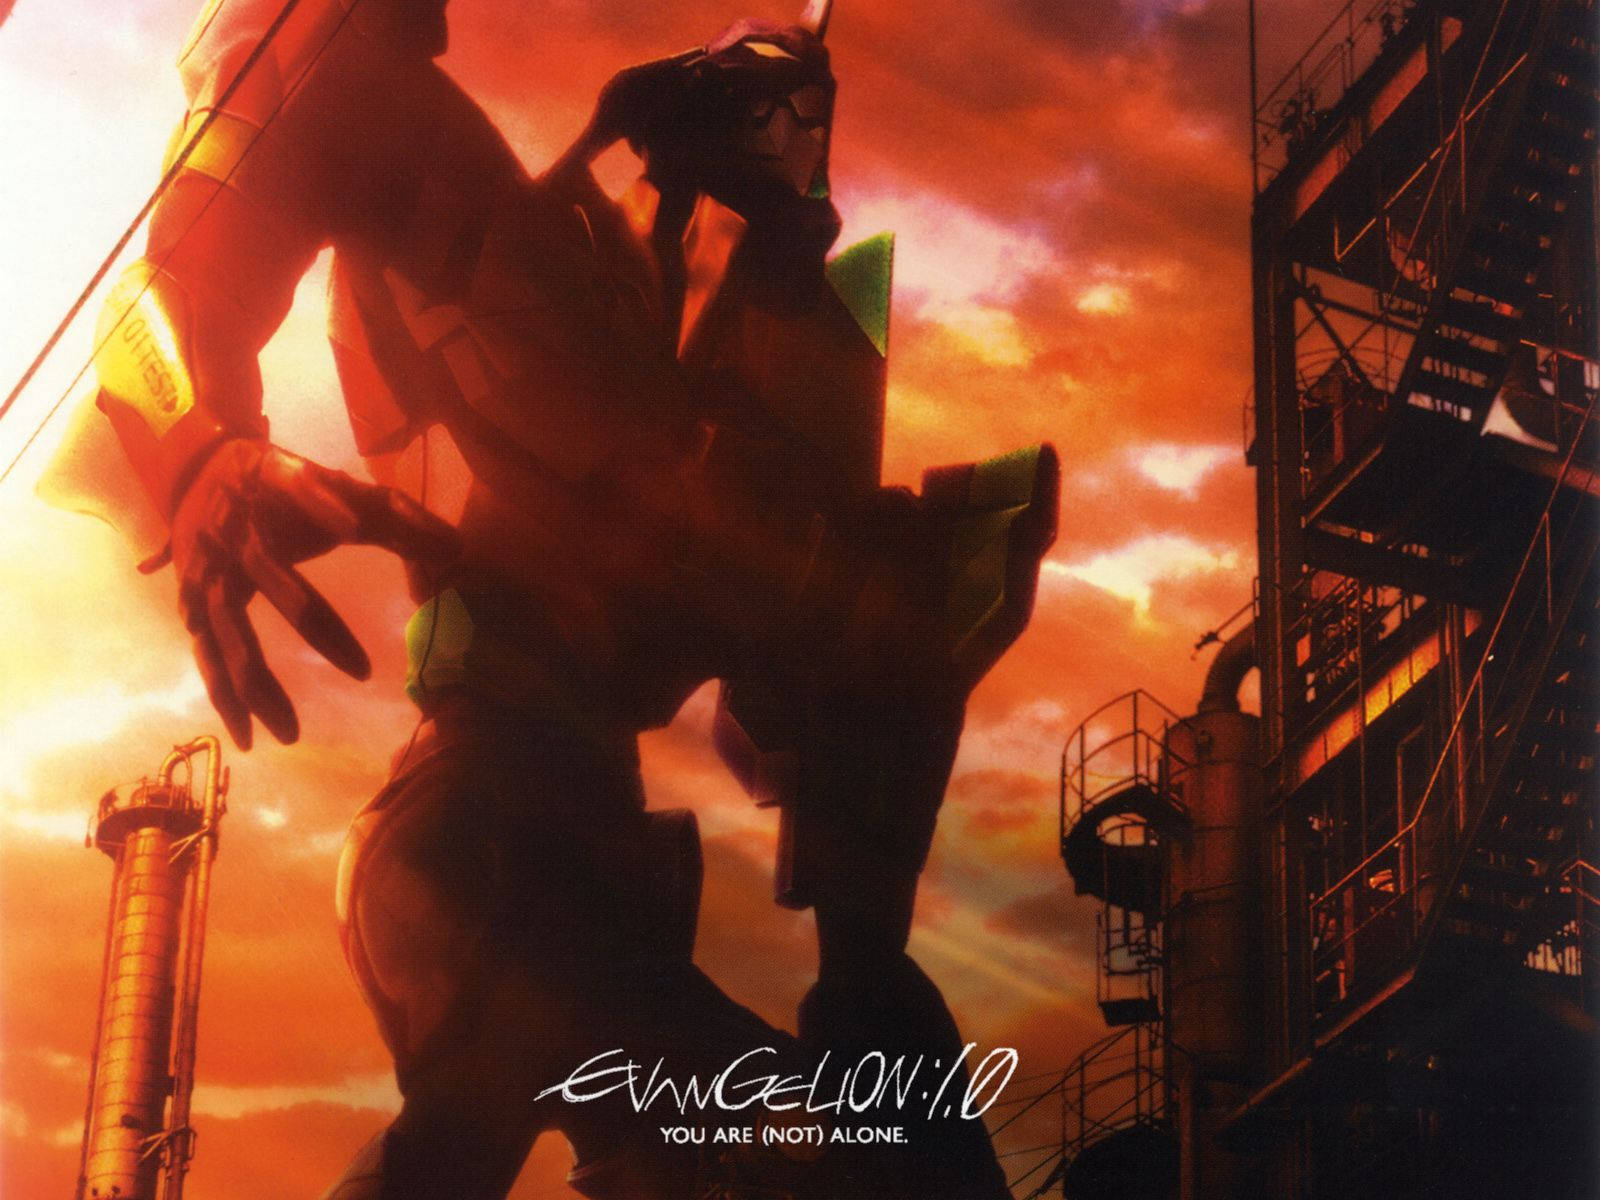 evangelion-1.0-you-are-(not)-alone